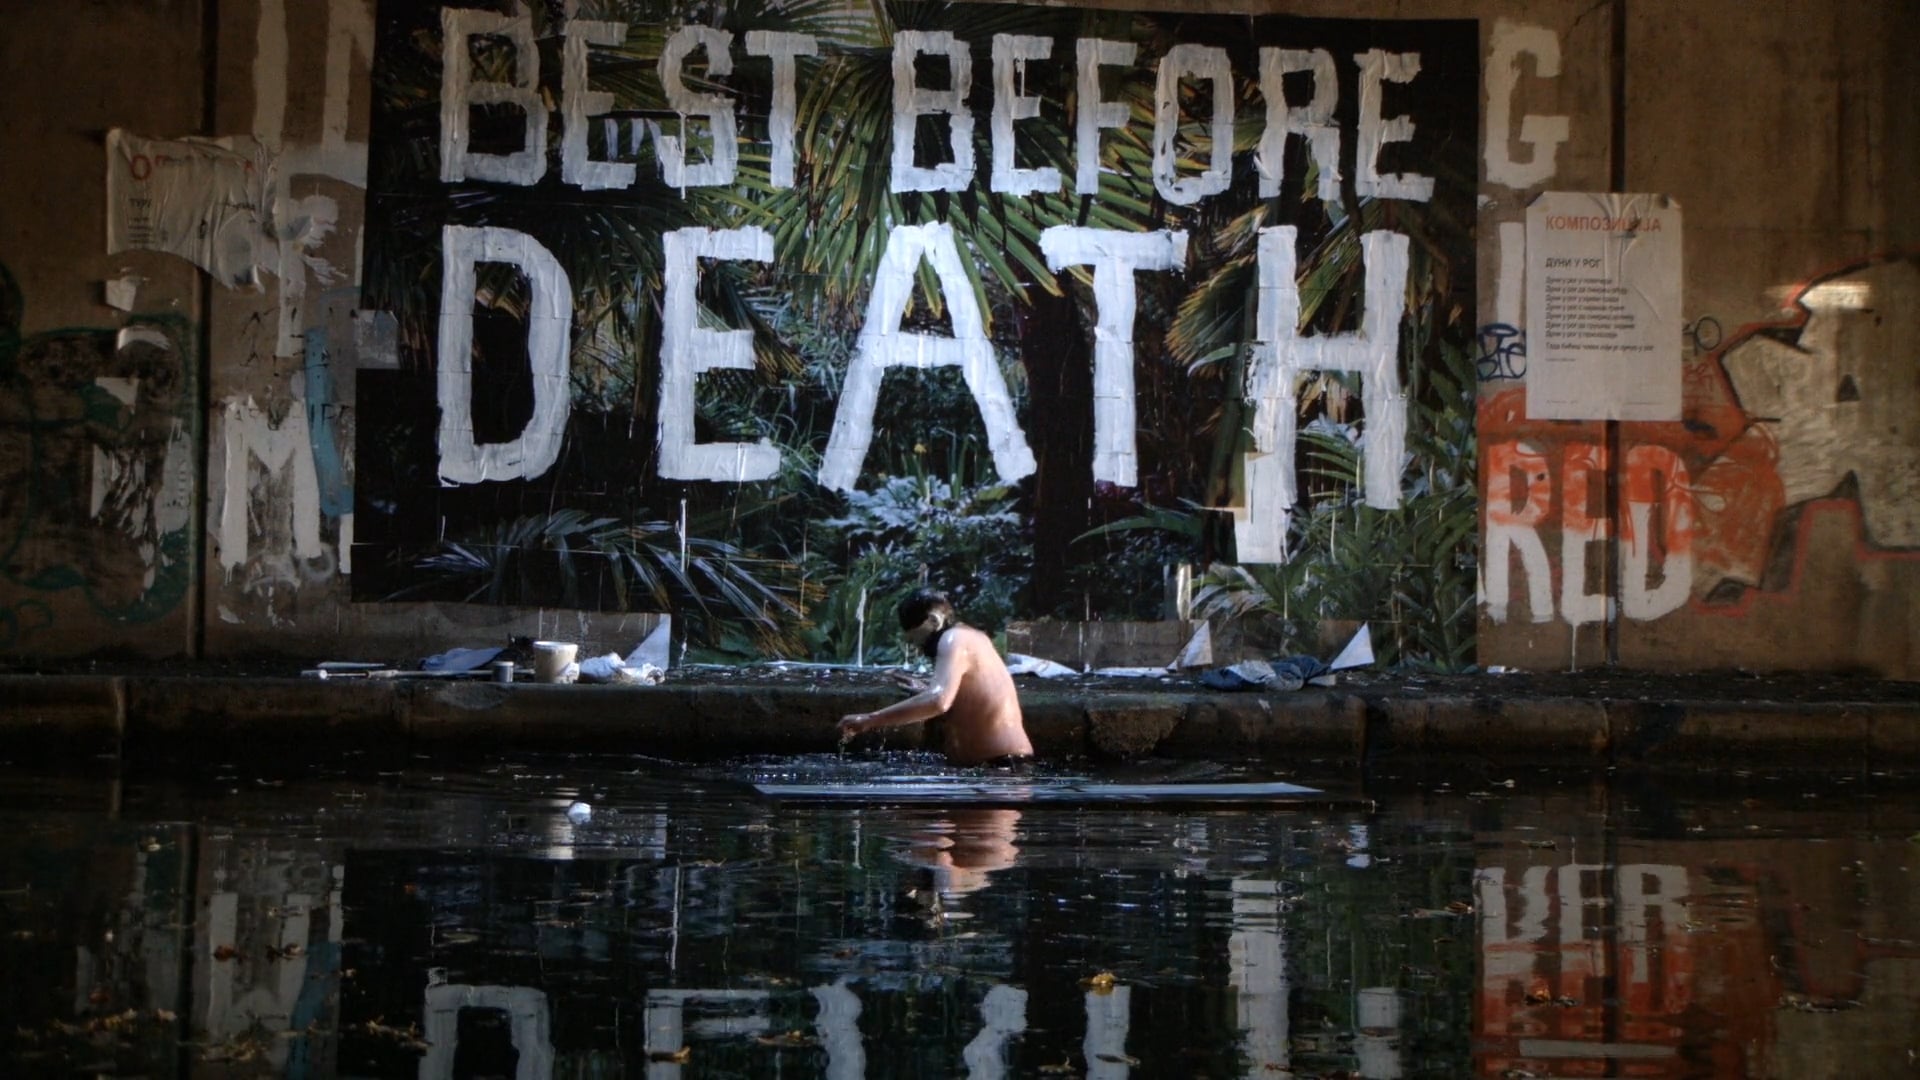 Watch BEST BEFORE DEATH - A FILM ABOUT BILL DRUMMOND by Paul Duane Online |  Vimeo On Demand